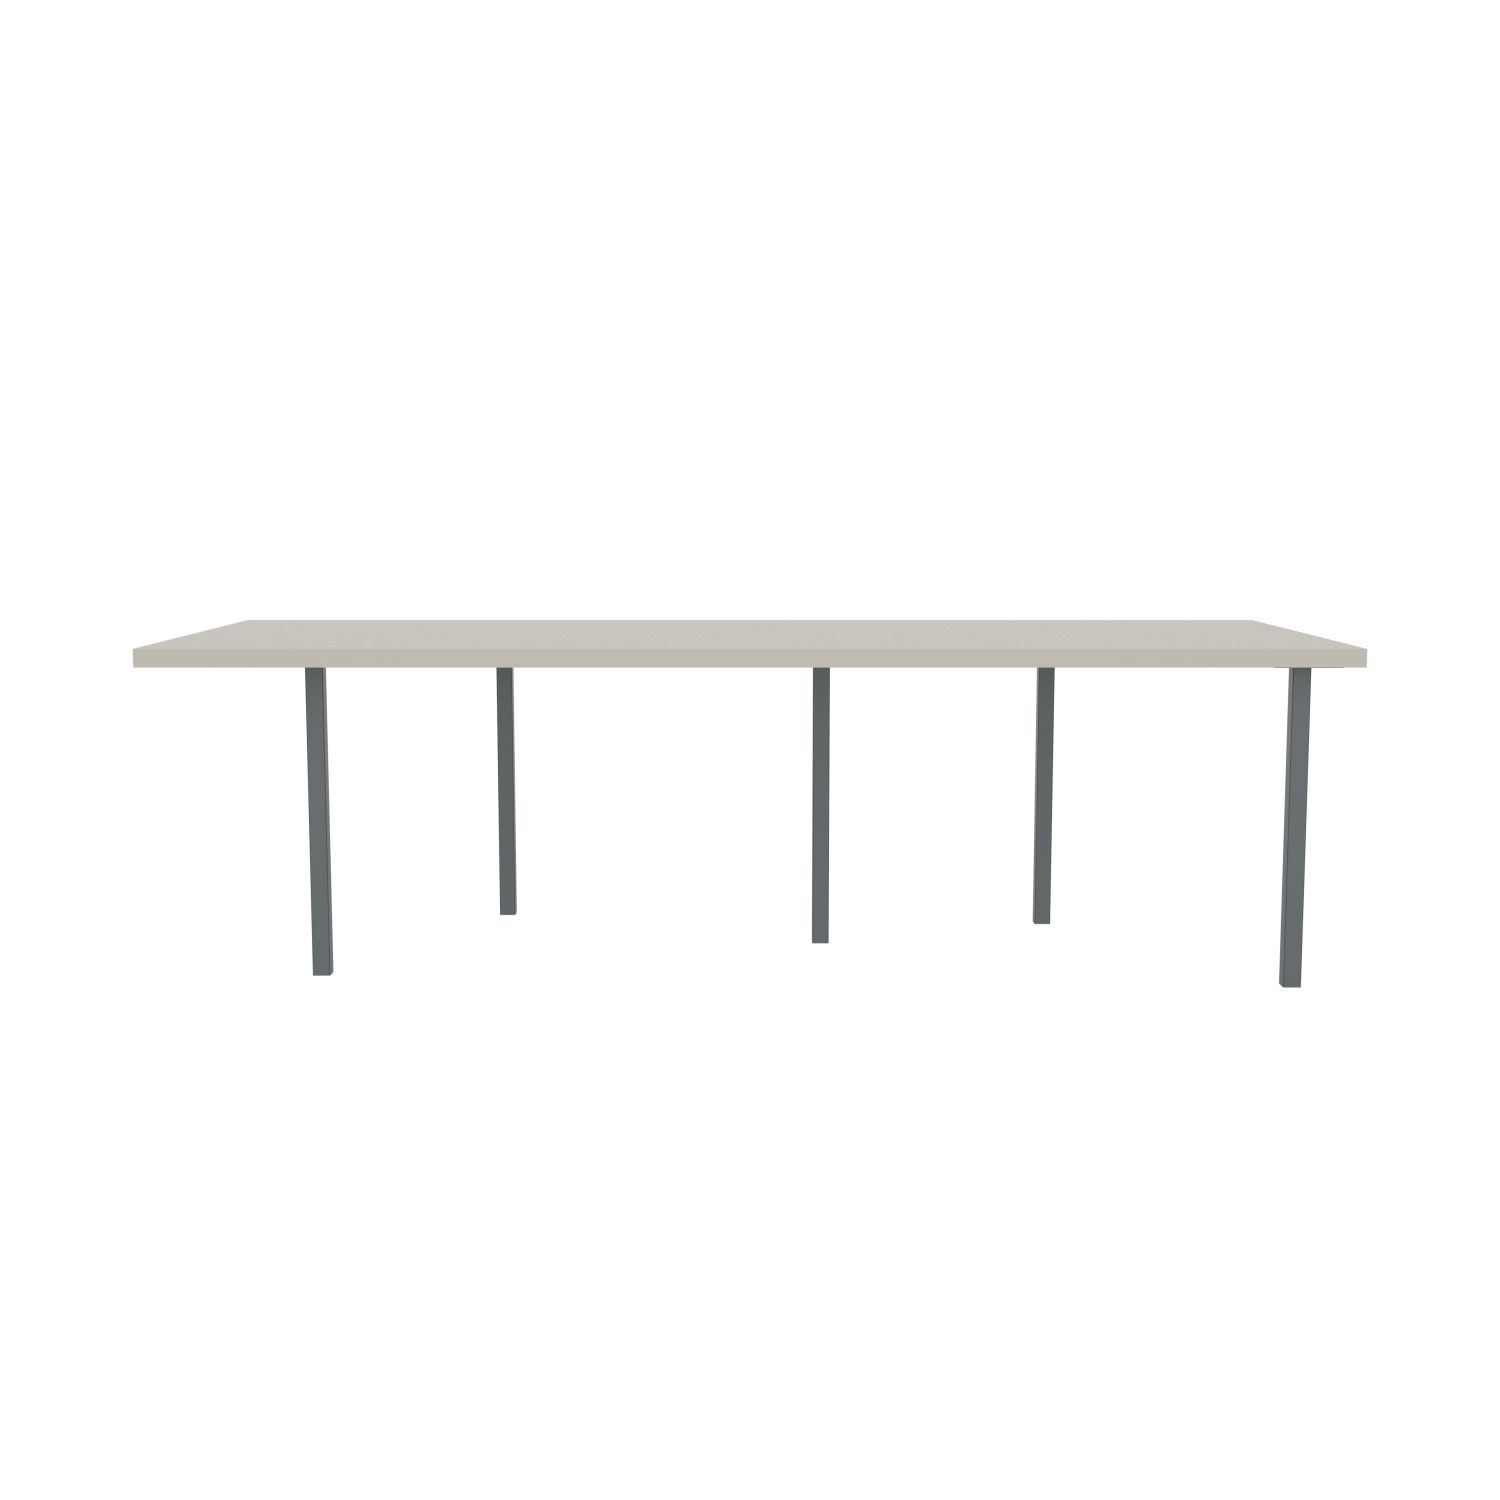 lensvelt bbrand table five fixed heigt 103x264 hpl white 50 mm price level 1 dark grey ral7011